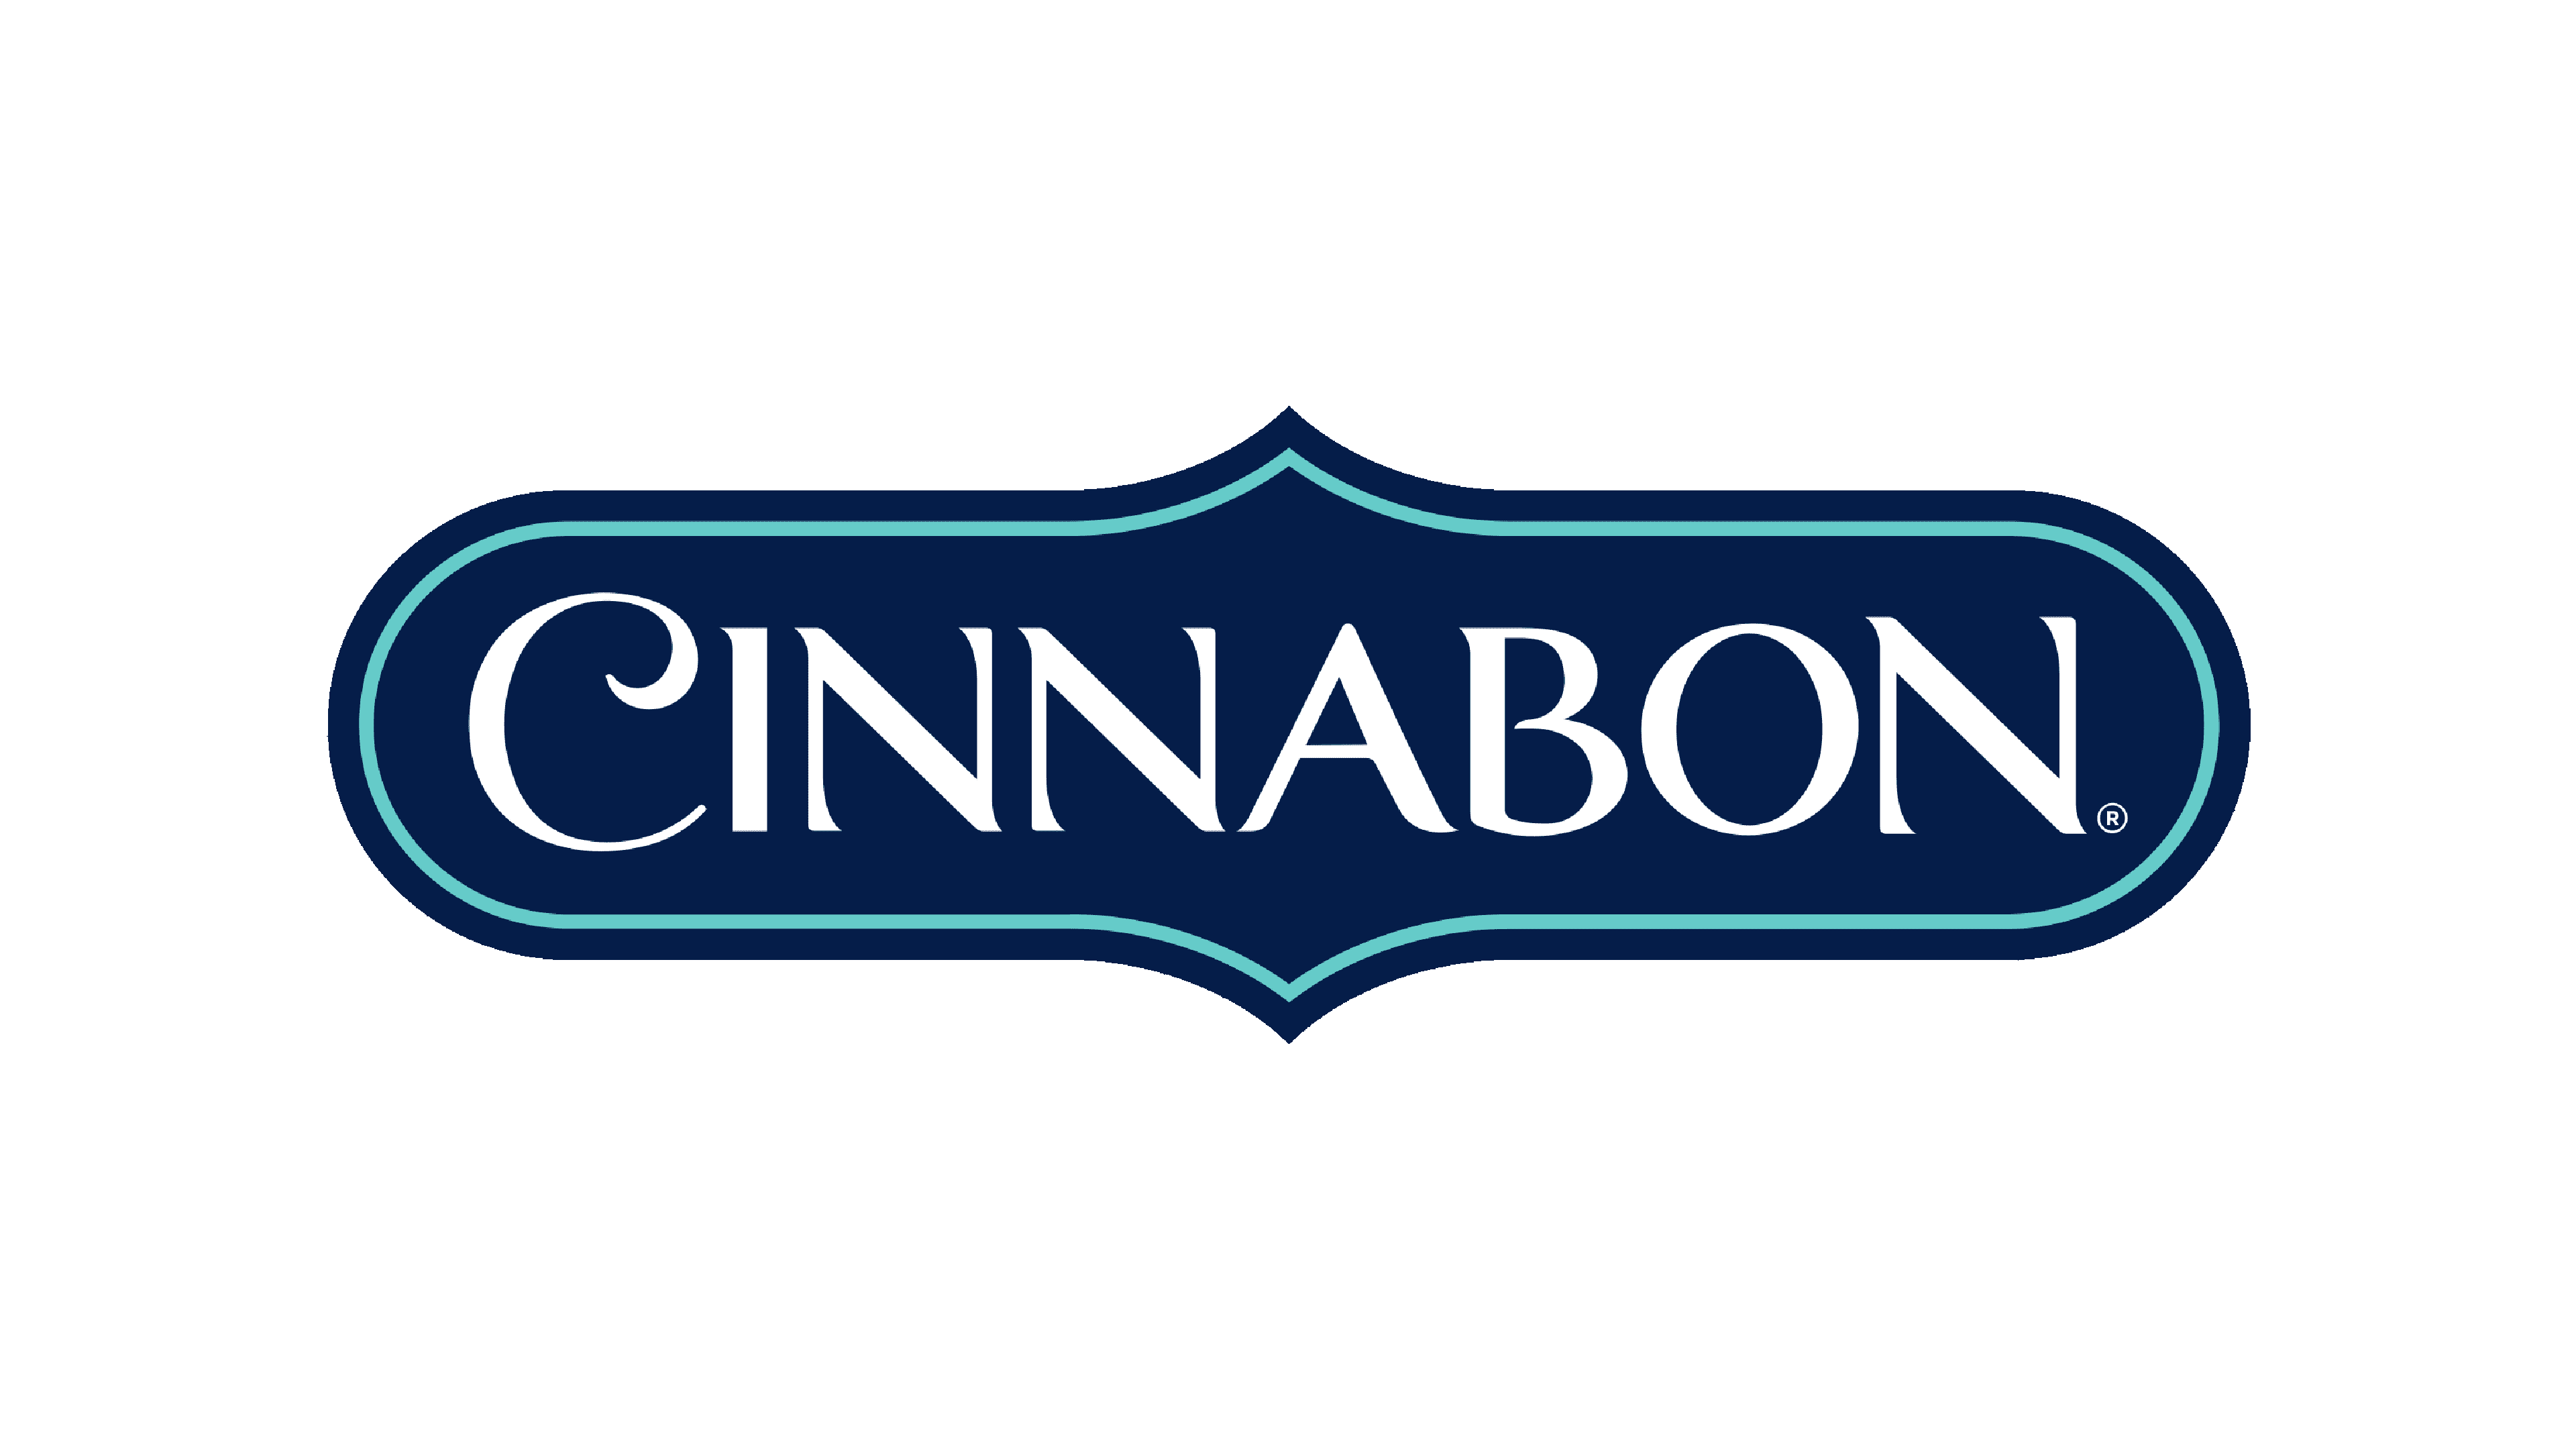 BOGO Classic Roll, MiniBon, 4-count BonBites, or Center of the Roll  at Cinnabon for reward members 10/04/22 to 10/07/22 and free 4ct BonBites for new members